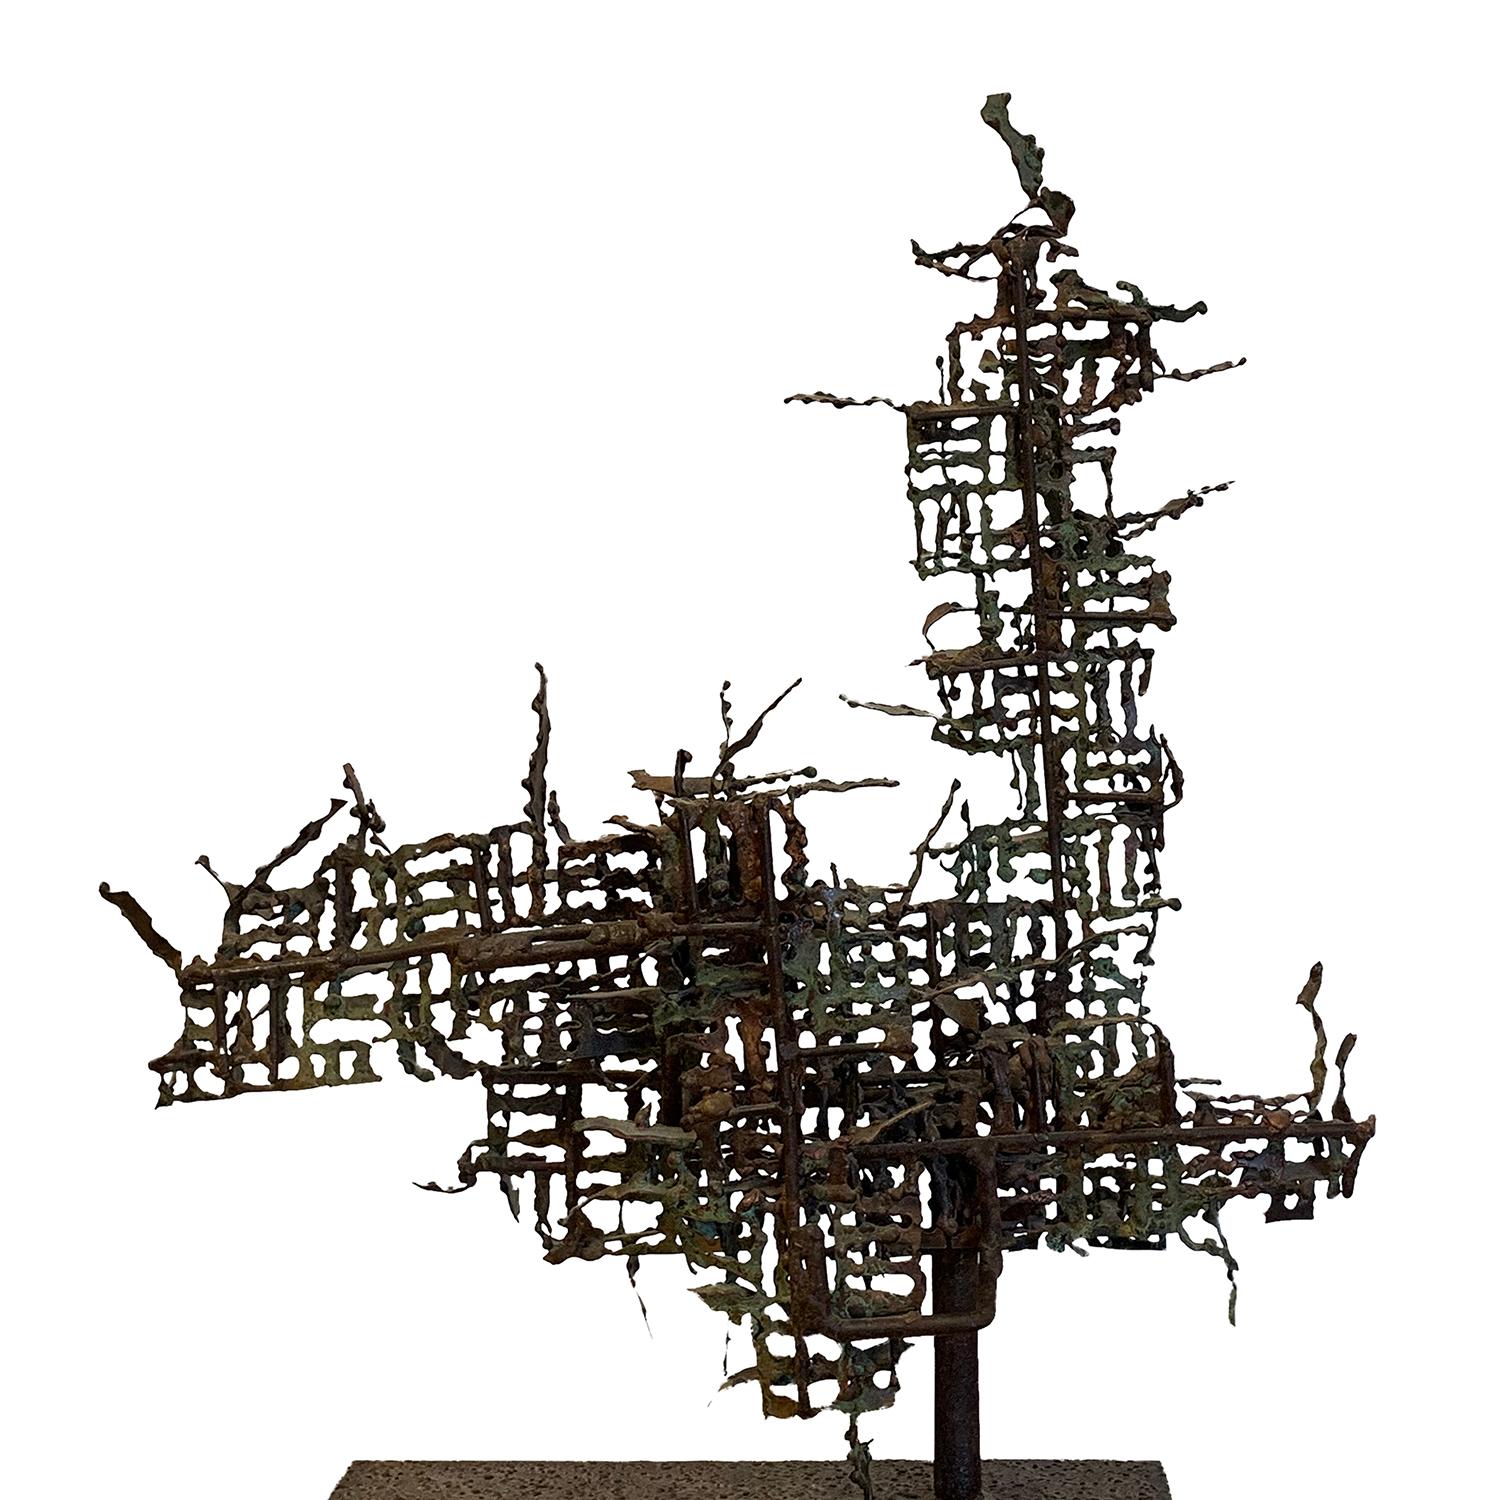 A vintage Mid-Century Modern Italian Brutalist abstract sculpture made of metal, welded and signed by Marcello Fantoni, in good condition. Wear consistent with age and use, circa 1950, Italy.

Marcello Fantoni was an Italian designer and producer